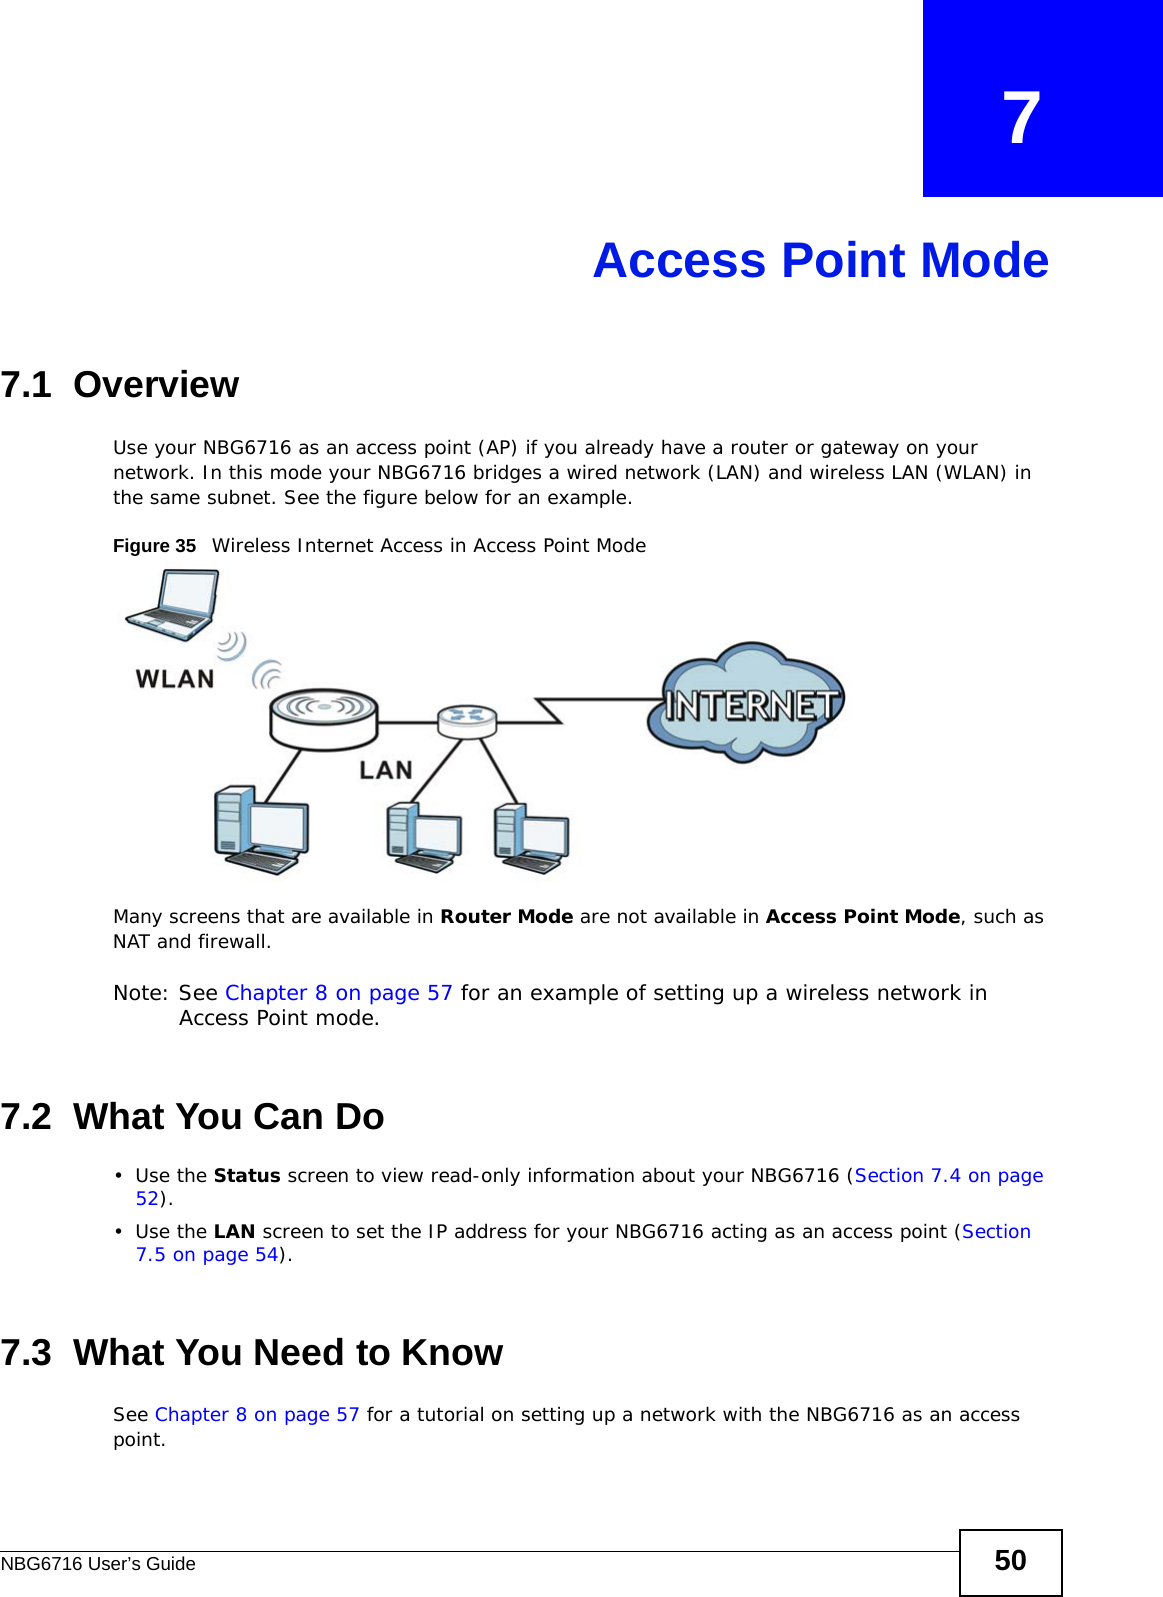 NBG6716 User’s Guide 50CHAPTER   7Access Point Mode7.1  OverviewUse your NBG6716 as an access point (AP) if you already have a router or gateway on your network. In this mode your NBG6716 bridges a wired network (LAN) and wireless LAN (WLAN) in the same subnet. See the figure below for an example.Figure 35   Wireless Internet Access in Access Point Mode Many screens that are available in Router Mode are not available in Access Point Mode, such as NAT and firewall.Note: See Chapter 8 on page 57 for an example of setting up a wireless network in Access Point mode. 7.2  What You Can Do•Use the Status screen to view read-only information about your NBG6716 (Section 7.4 on page 52).•Use the LAN screen to set the IP address for your NBG6716 acting as an access point (Section 7.5 on page 54).7.3  What You Need to KnowSee Chapter 8 on page 57 for a tutorial on setting up a network with the NBG6716 as an access point.